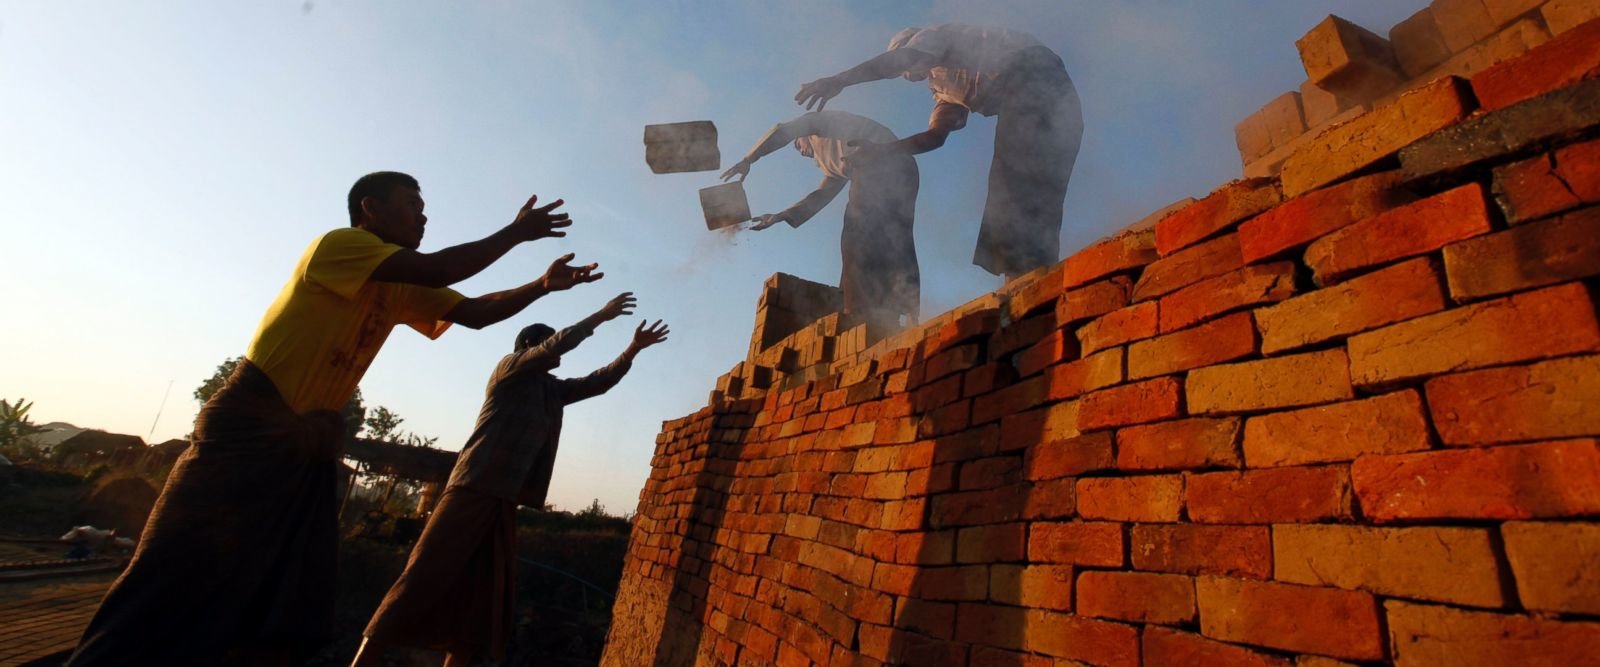 Workers unload bricks at a brick-making factory in Naypyitaw, Myanmar, Friday, Jan. 13, 2017. As bricks continue to be used in construction throughout Myanmar, traditional craftsmen who produce hand-made bricks are facing competition from machine-made bri